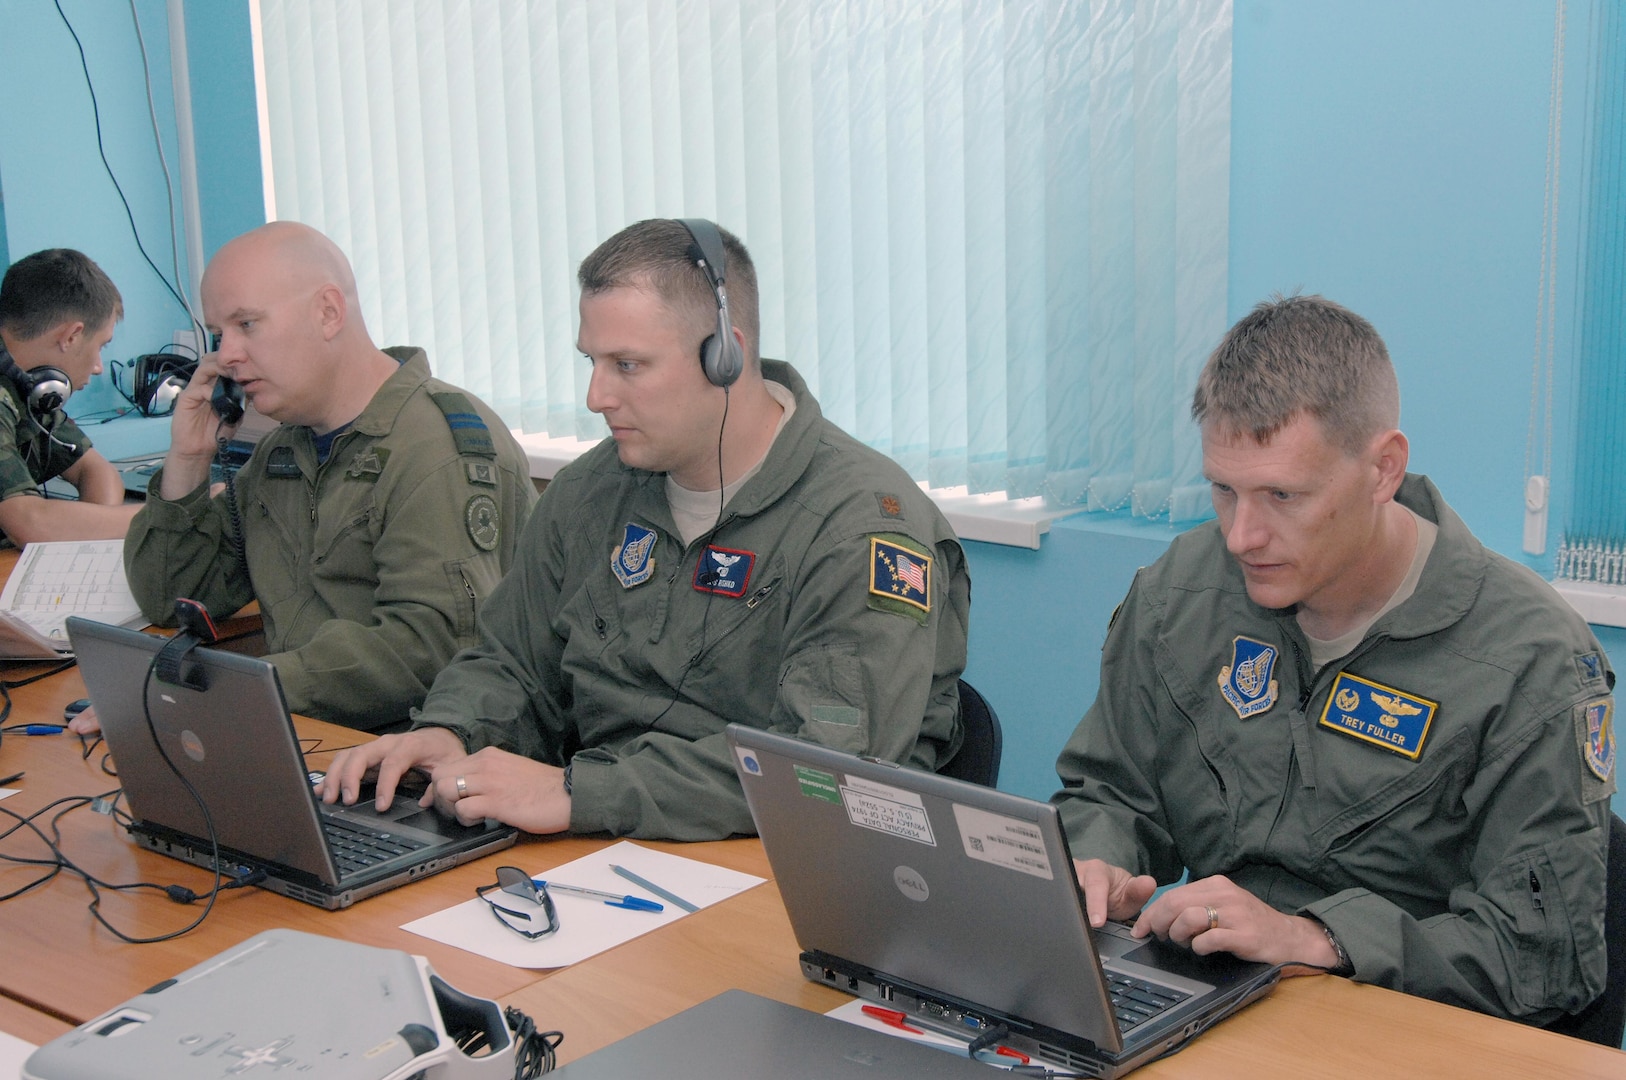 PETROPAVLOVSK-KAMCHATSKY,- Russia – (Left to right) Canadian Forces Capt. Steve McLean, 611th Air Operations Center, Maj. Chris Rishko, 176th Air Control Squadron, and Col. Trey Fuller, 611th AOC commander, coordinate with members of the North American Aerospace Defense Command and the Russian Federation Air Force during Exercise Vigilant Eagle Aug. 8, 2011. Vigilant Eagle is joint anti-terrorism exercise that focuses on cooperation between NORAD and Russian forces during the hijacking of an airliner. (U.S. Air Force photo by Tech. Sgt. Thomas J. Doscher)

